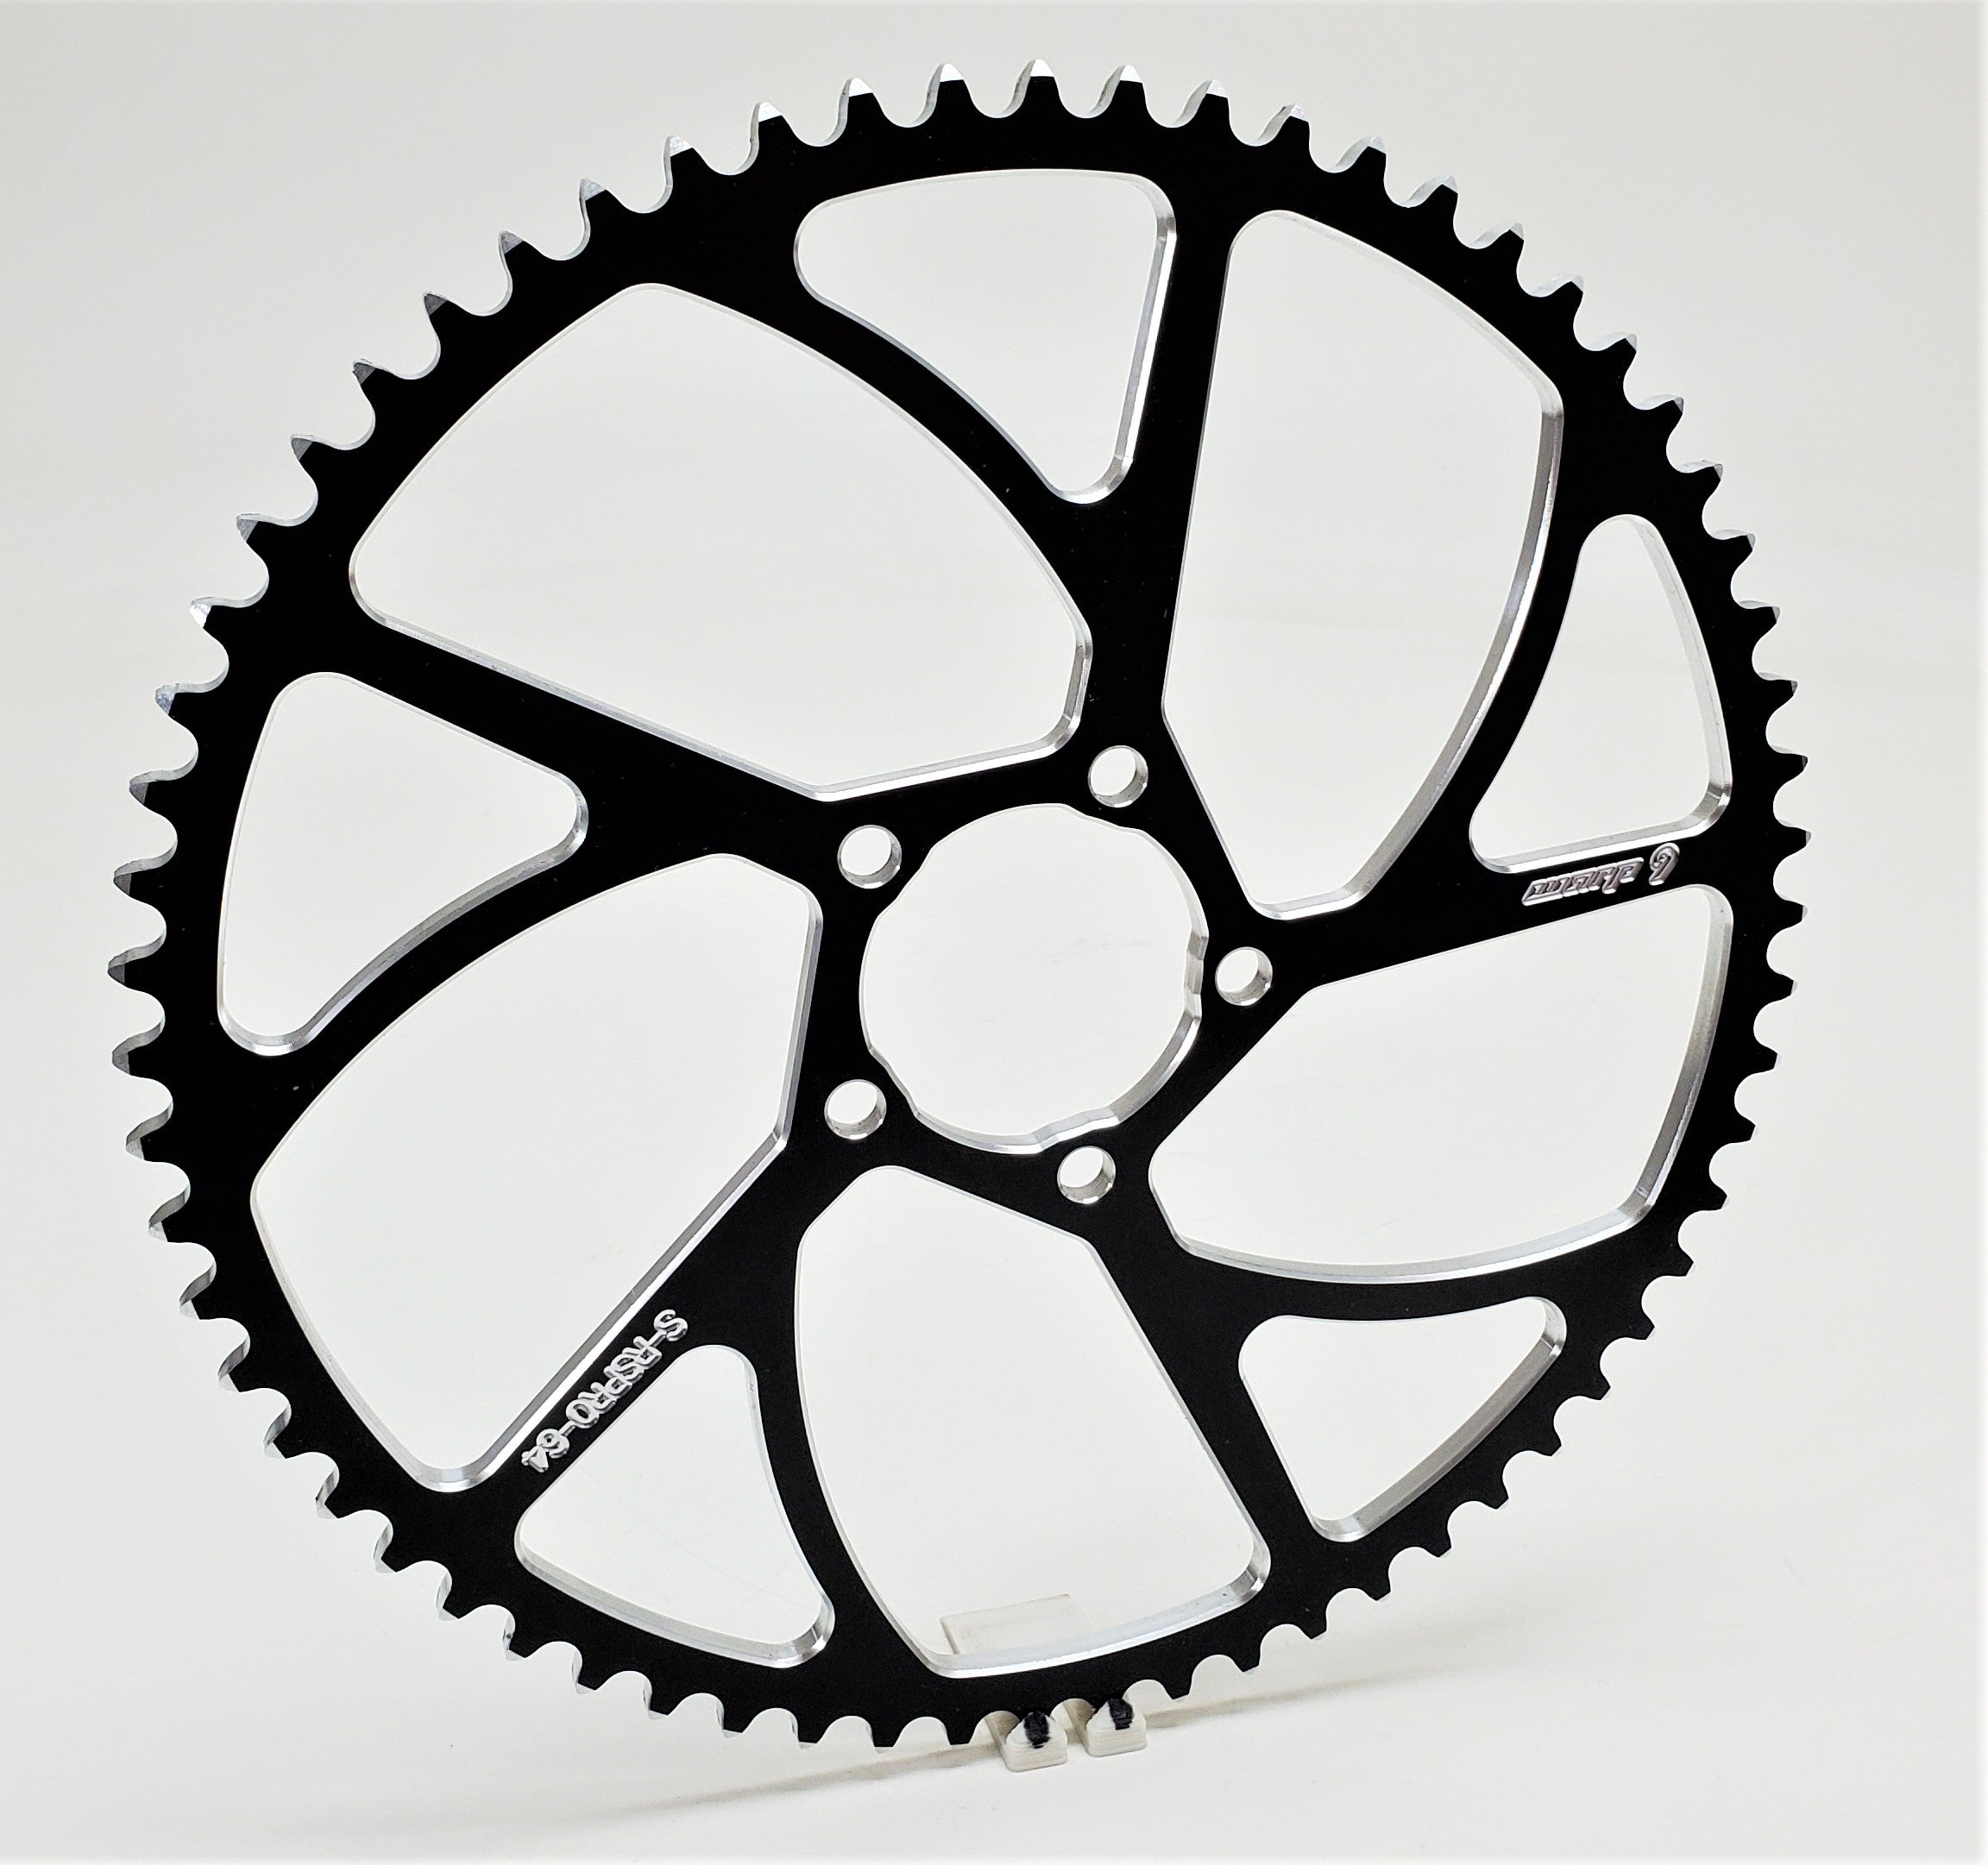 Warp 9 64 tooth sprocket for Surron Lightbee X and Talaria Sting